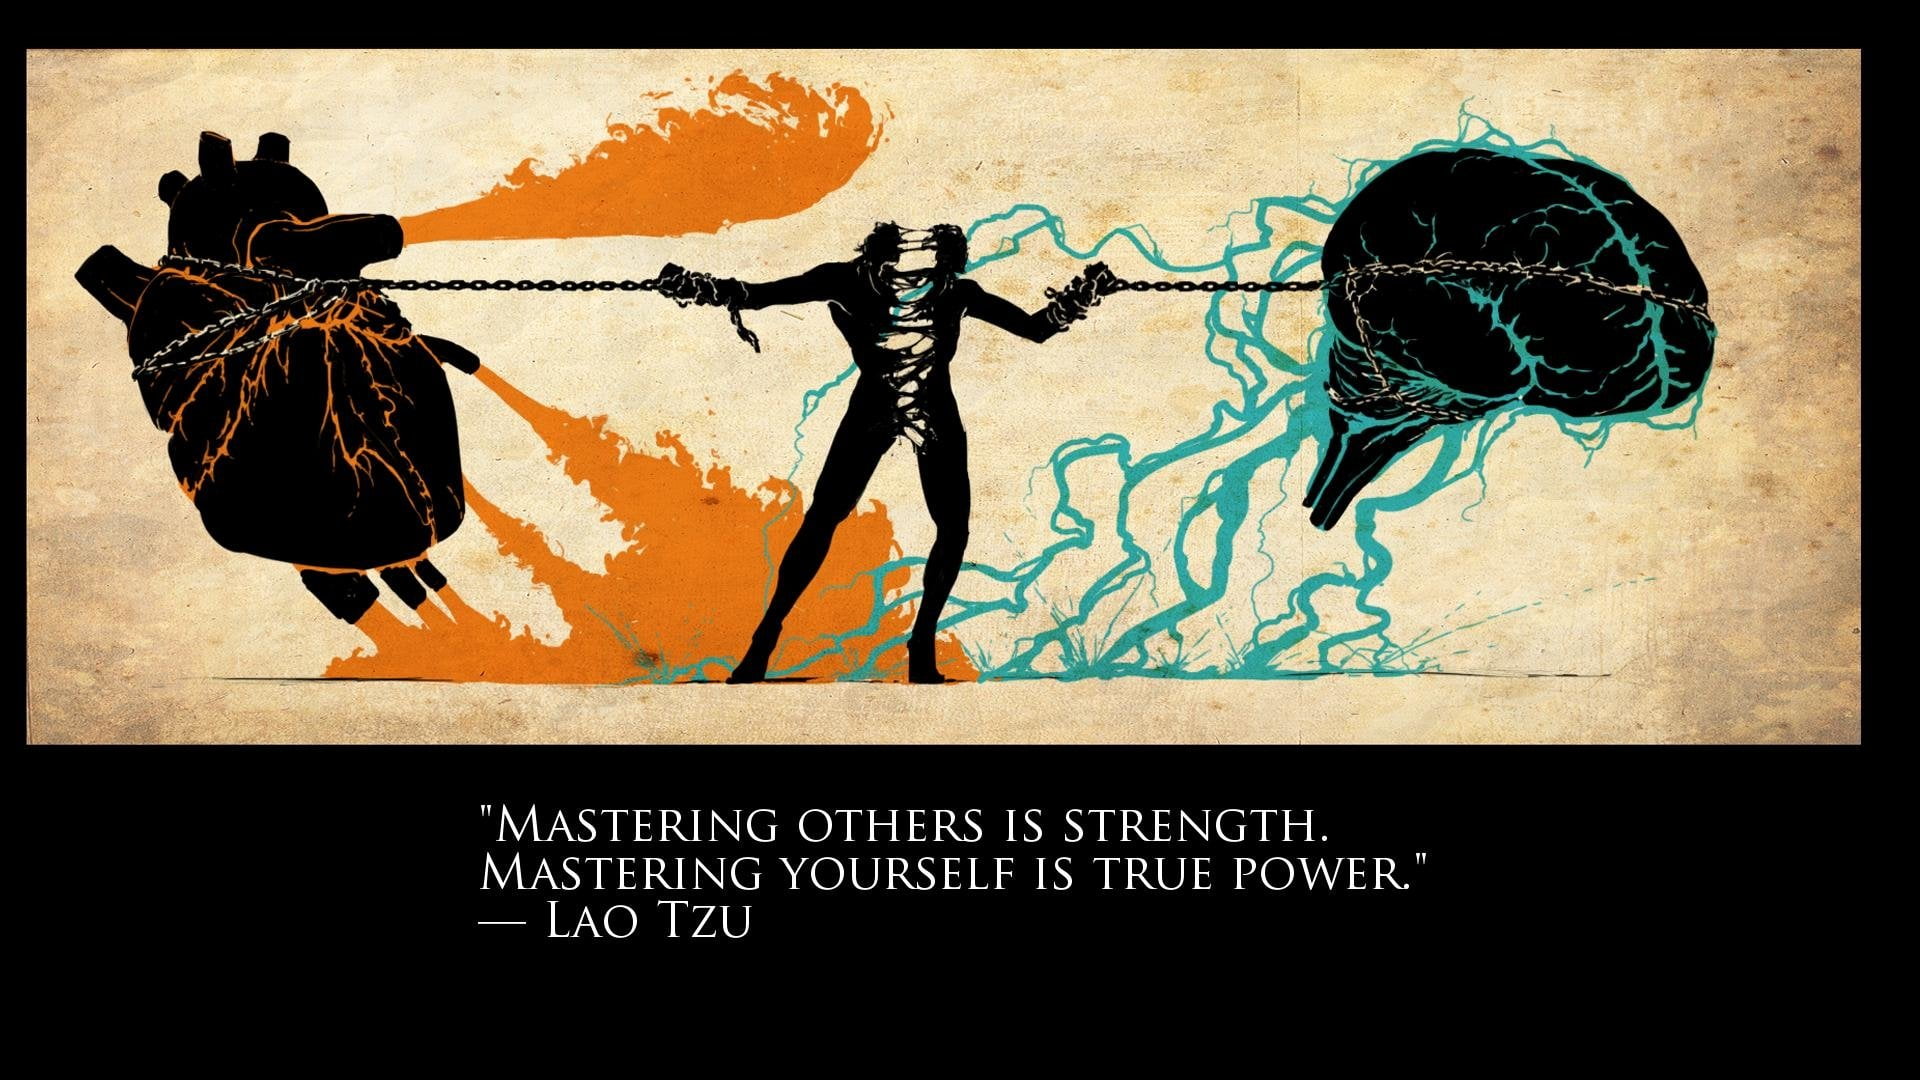 person pulling heart and brain illustration with mastering others is strength quote by Lao Tzu text overlay